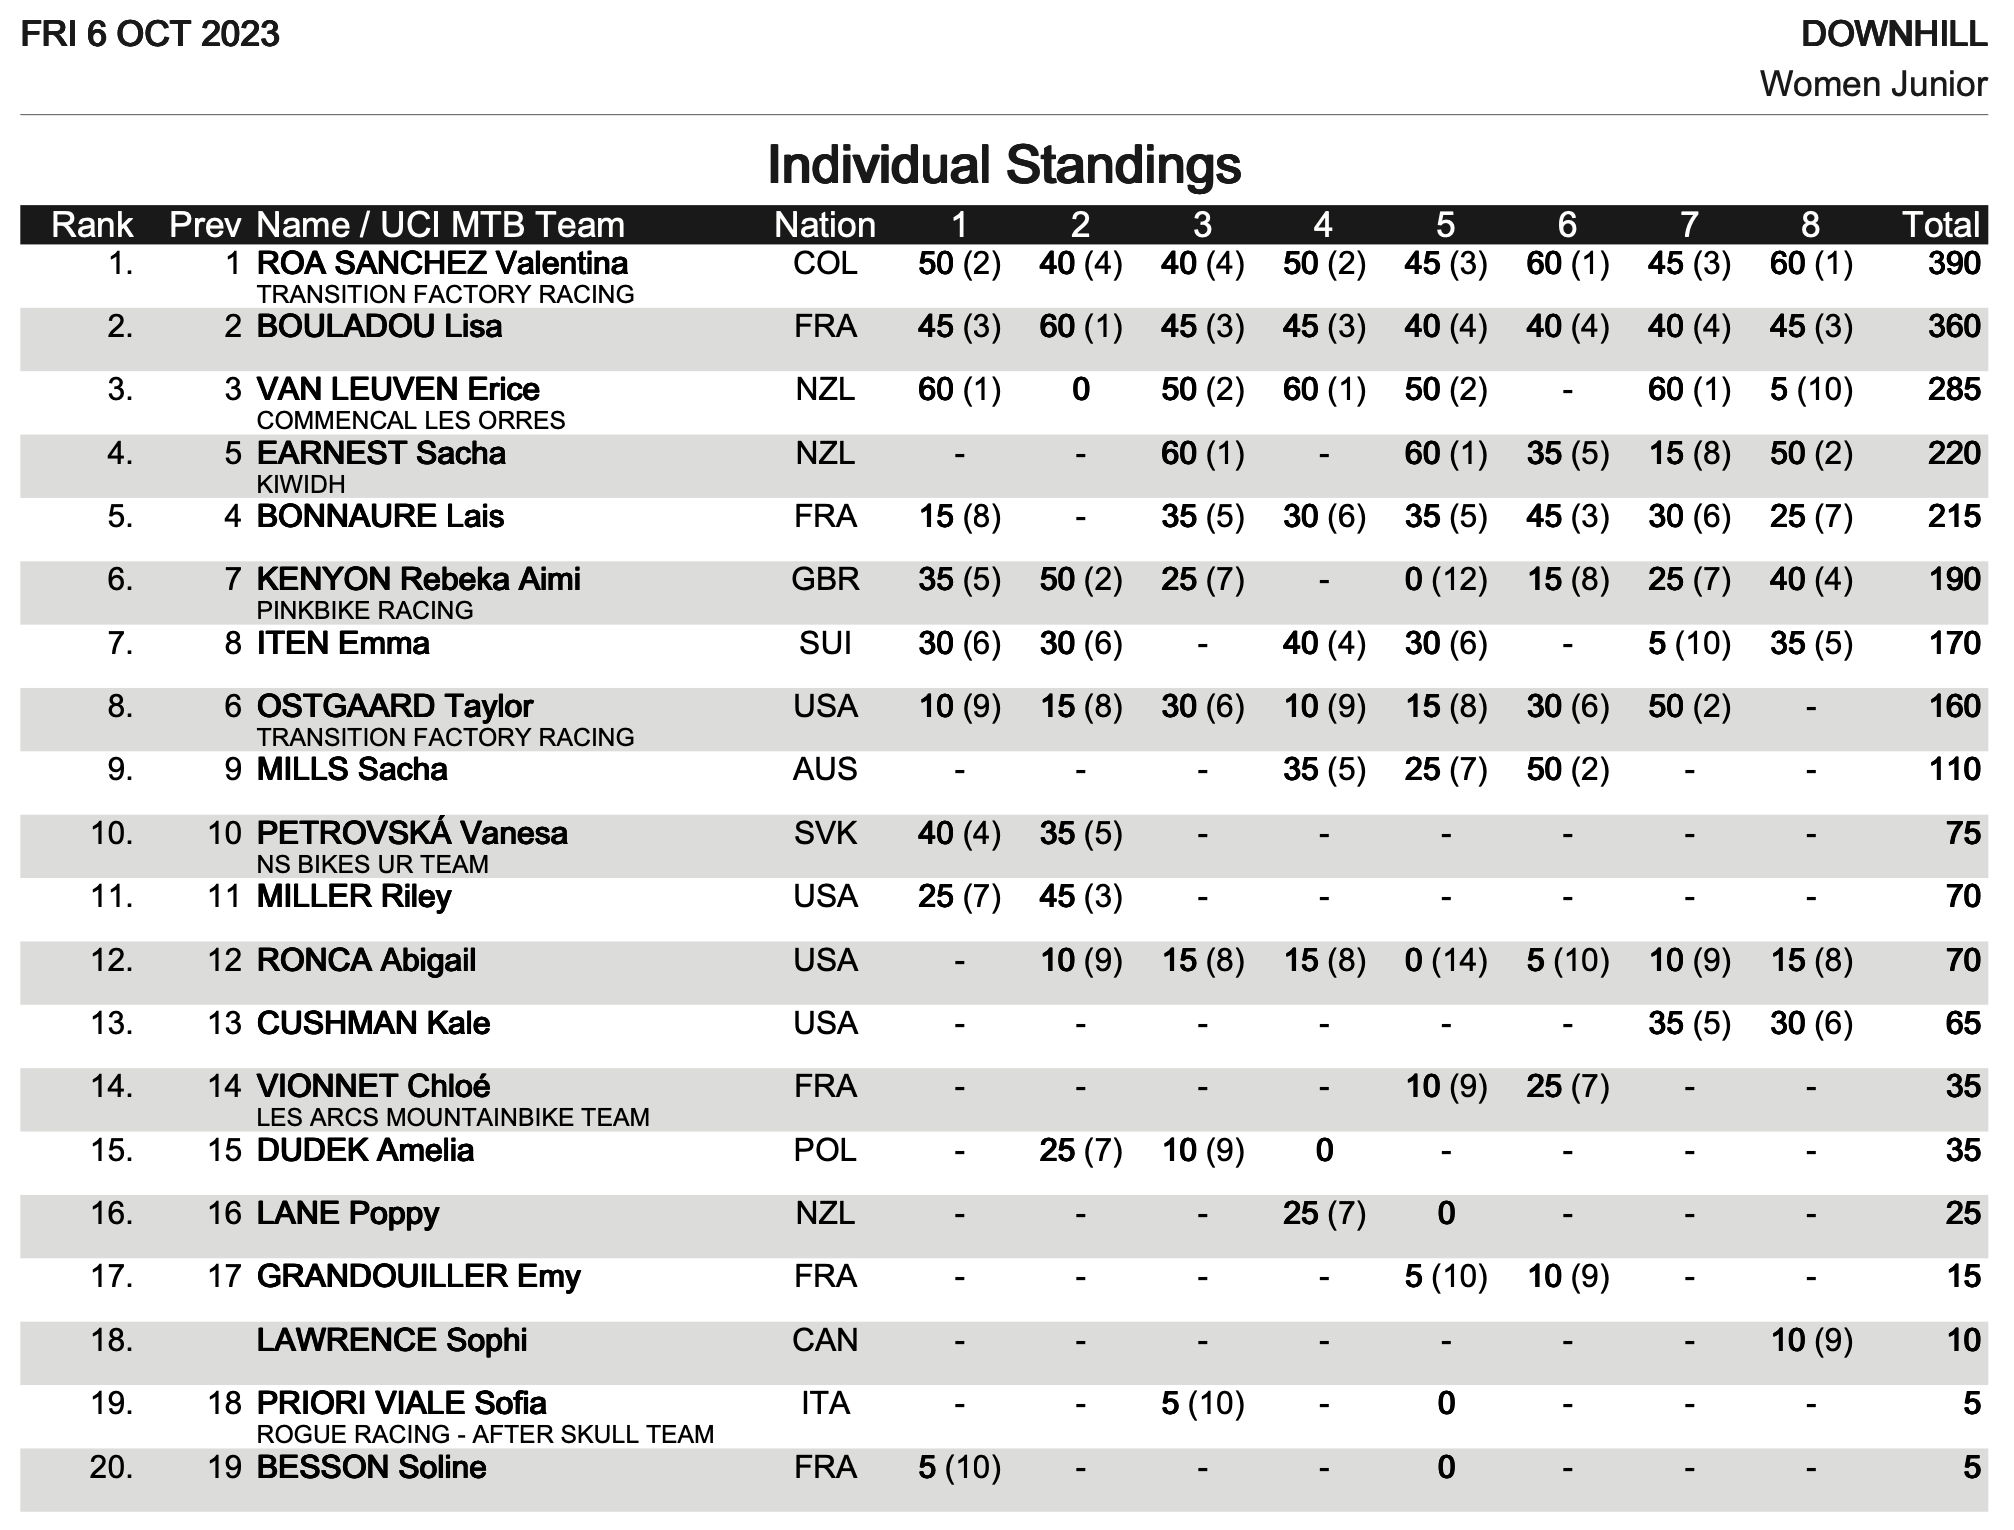 UPDATED] Elite Finals Results & Overall Standings from the Leogang